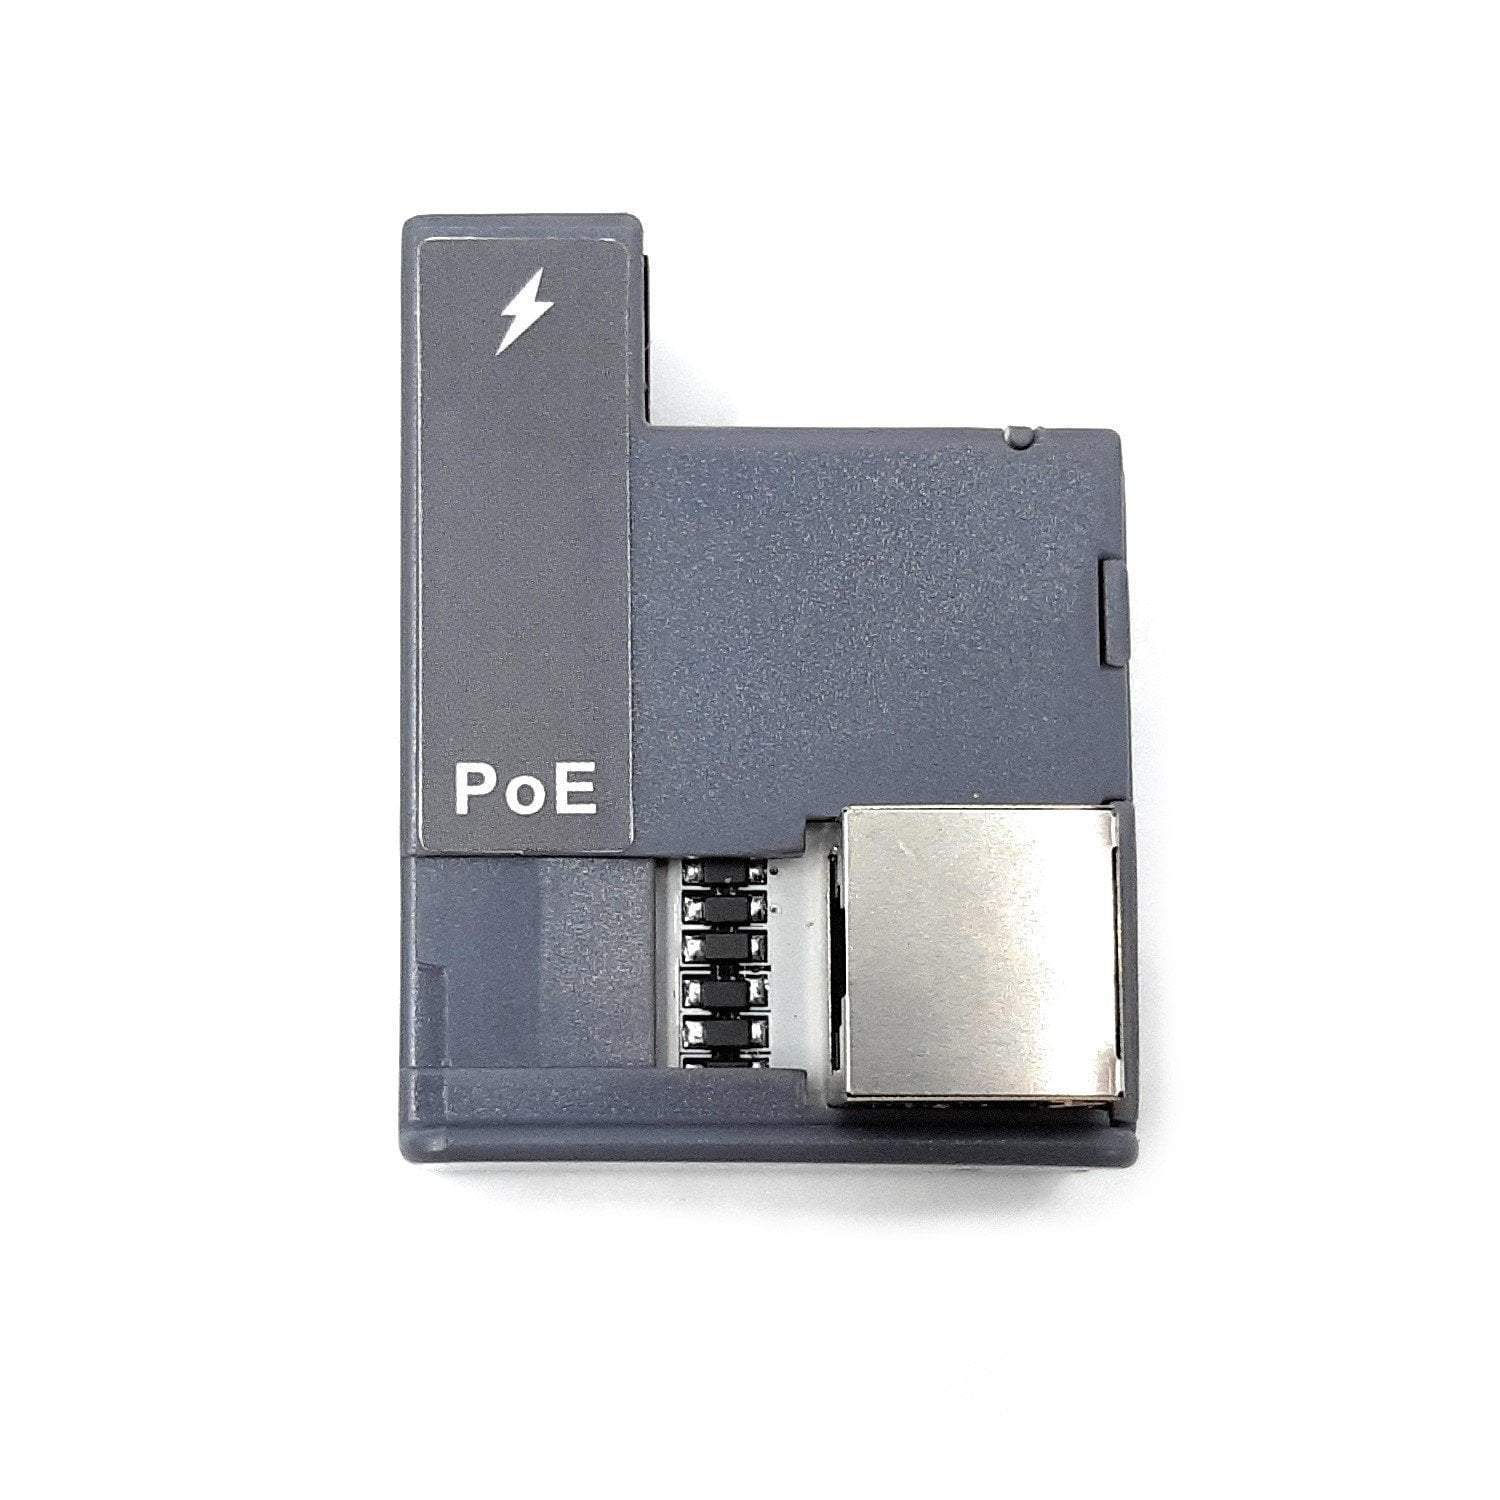 POE Texas Splitter POE+ to USB-C Power and Data Delivery with 25 Watt Output for iPad Pro, Surface Go, Galaxy Tab and More - 10/100 Mbps with Lightning Cable